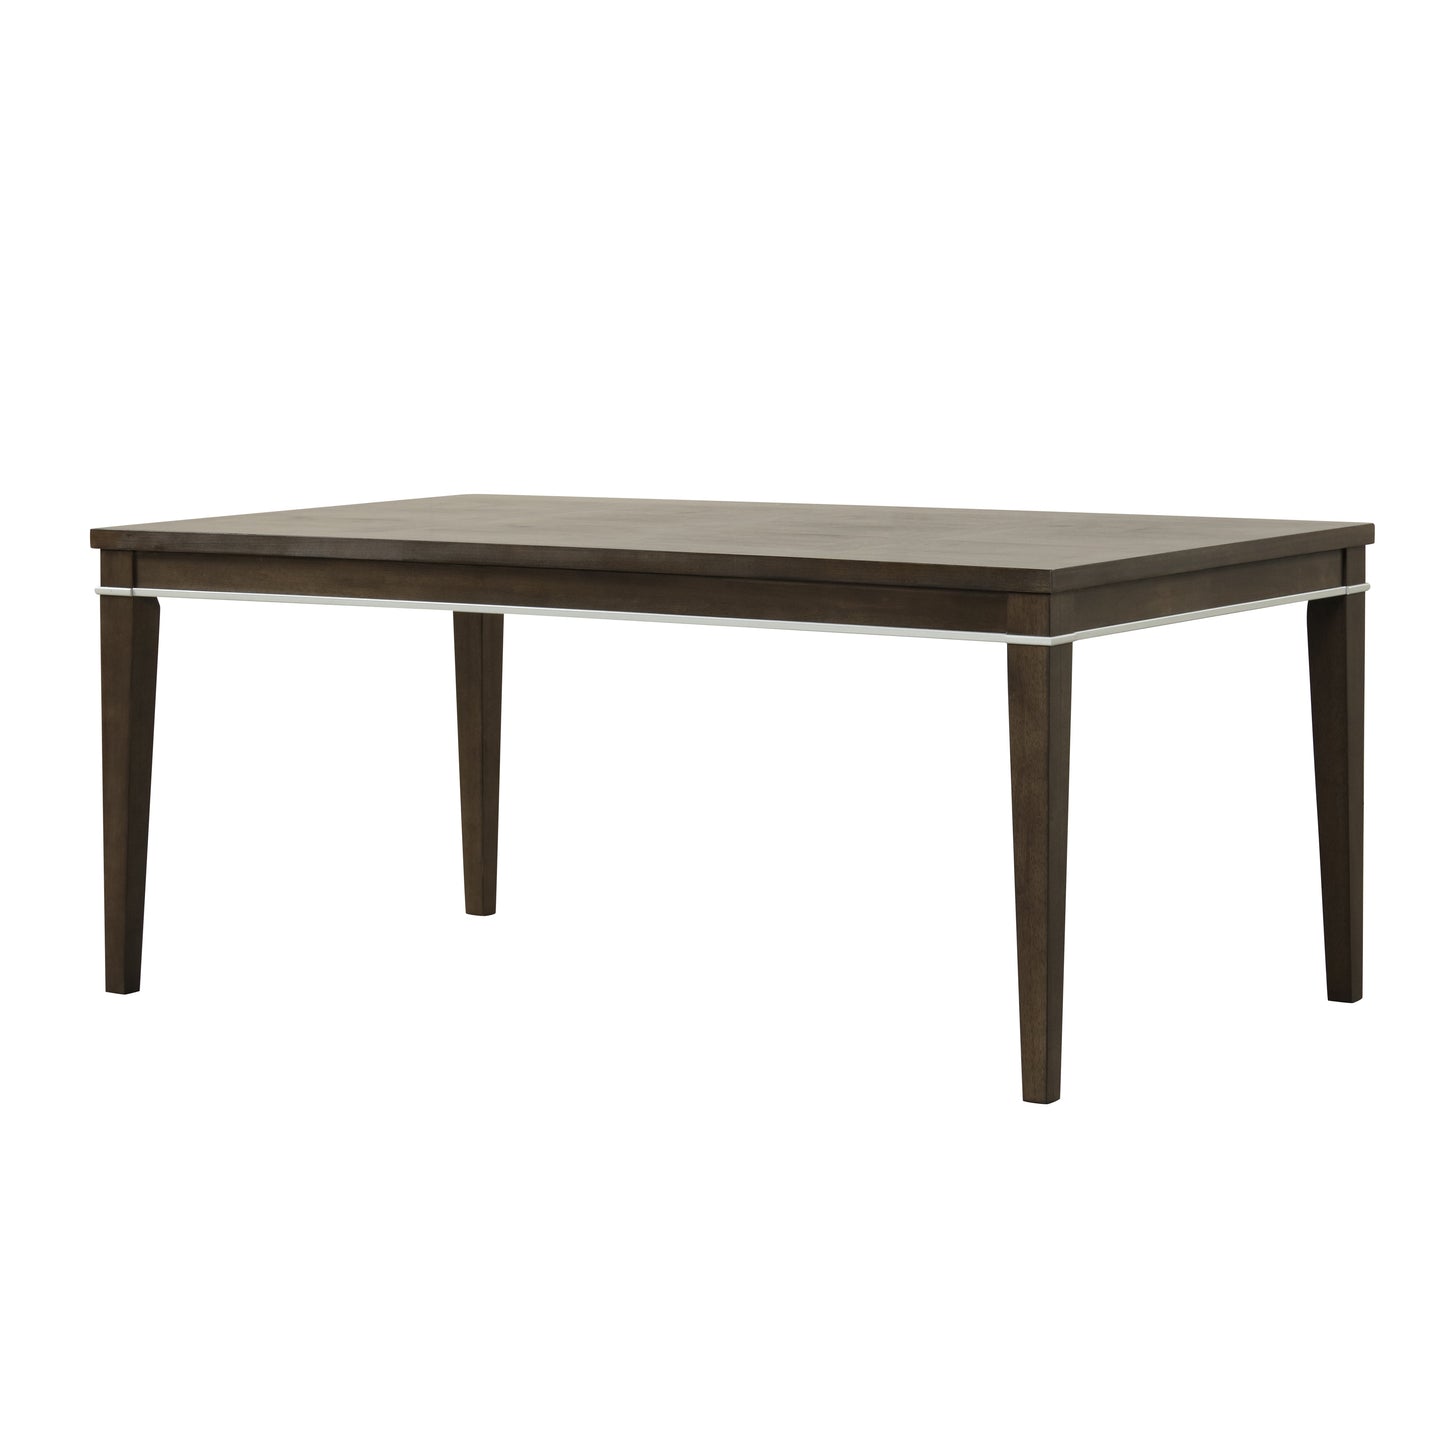 Roundhill Furniture Aberll Wood Dining Table, Gray